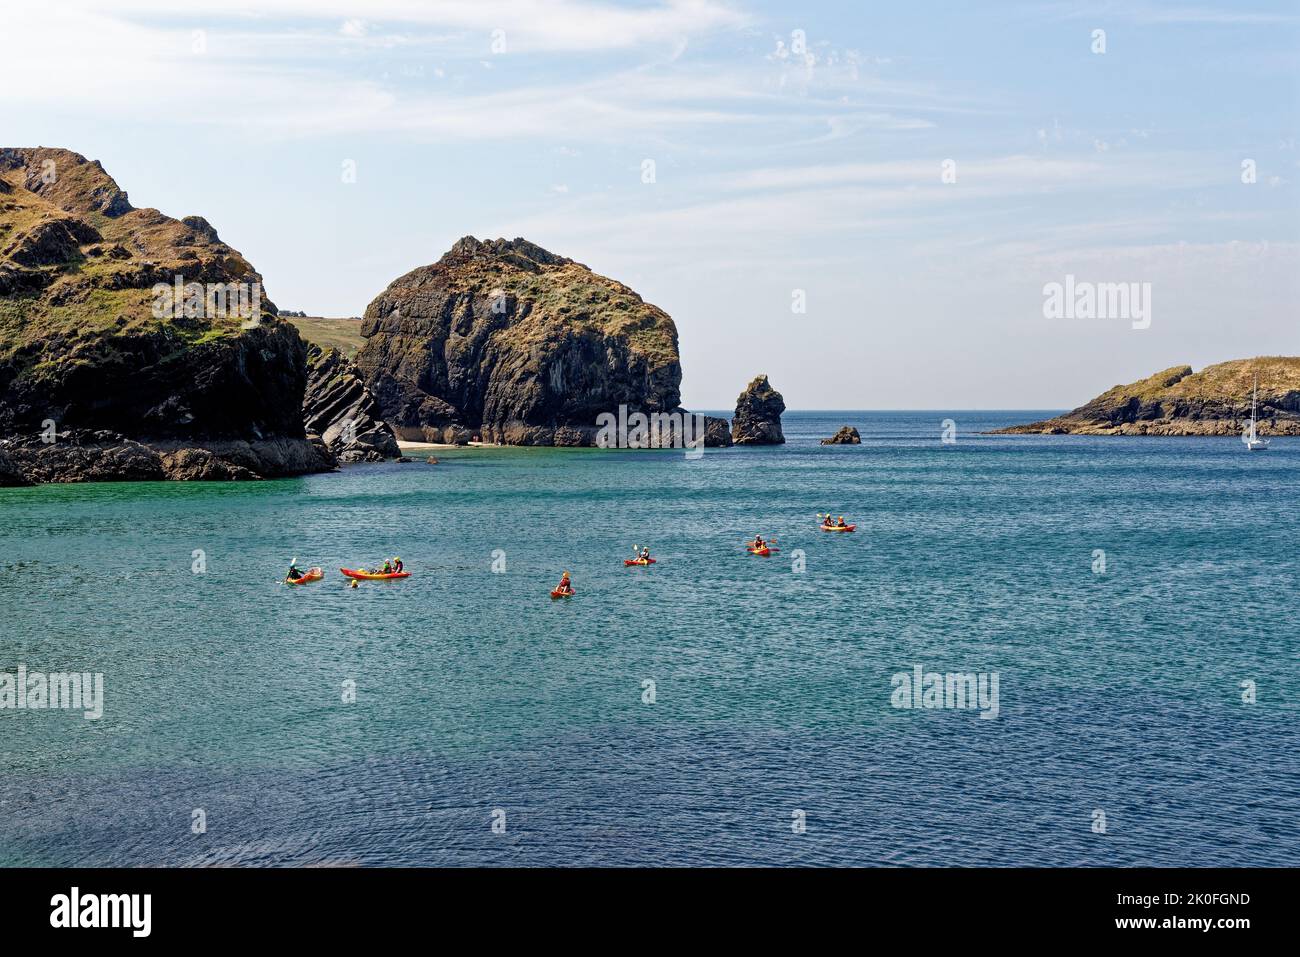 kayaking in Historic harbour at Mullion Cove in Mounts Bay Cornwall England UK. 13th of August 2022. Mullion Cove or Porth Mellin - port on the west c Stock Photo